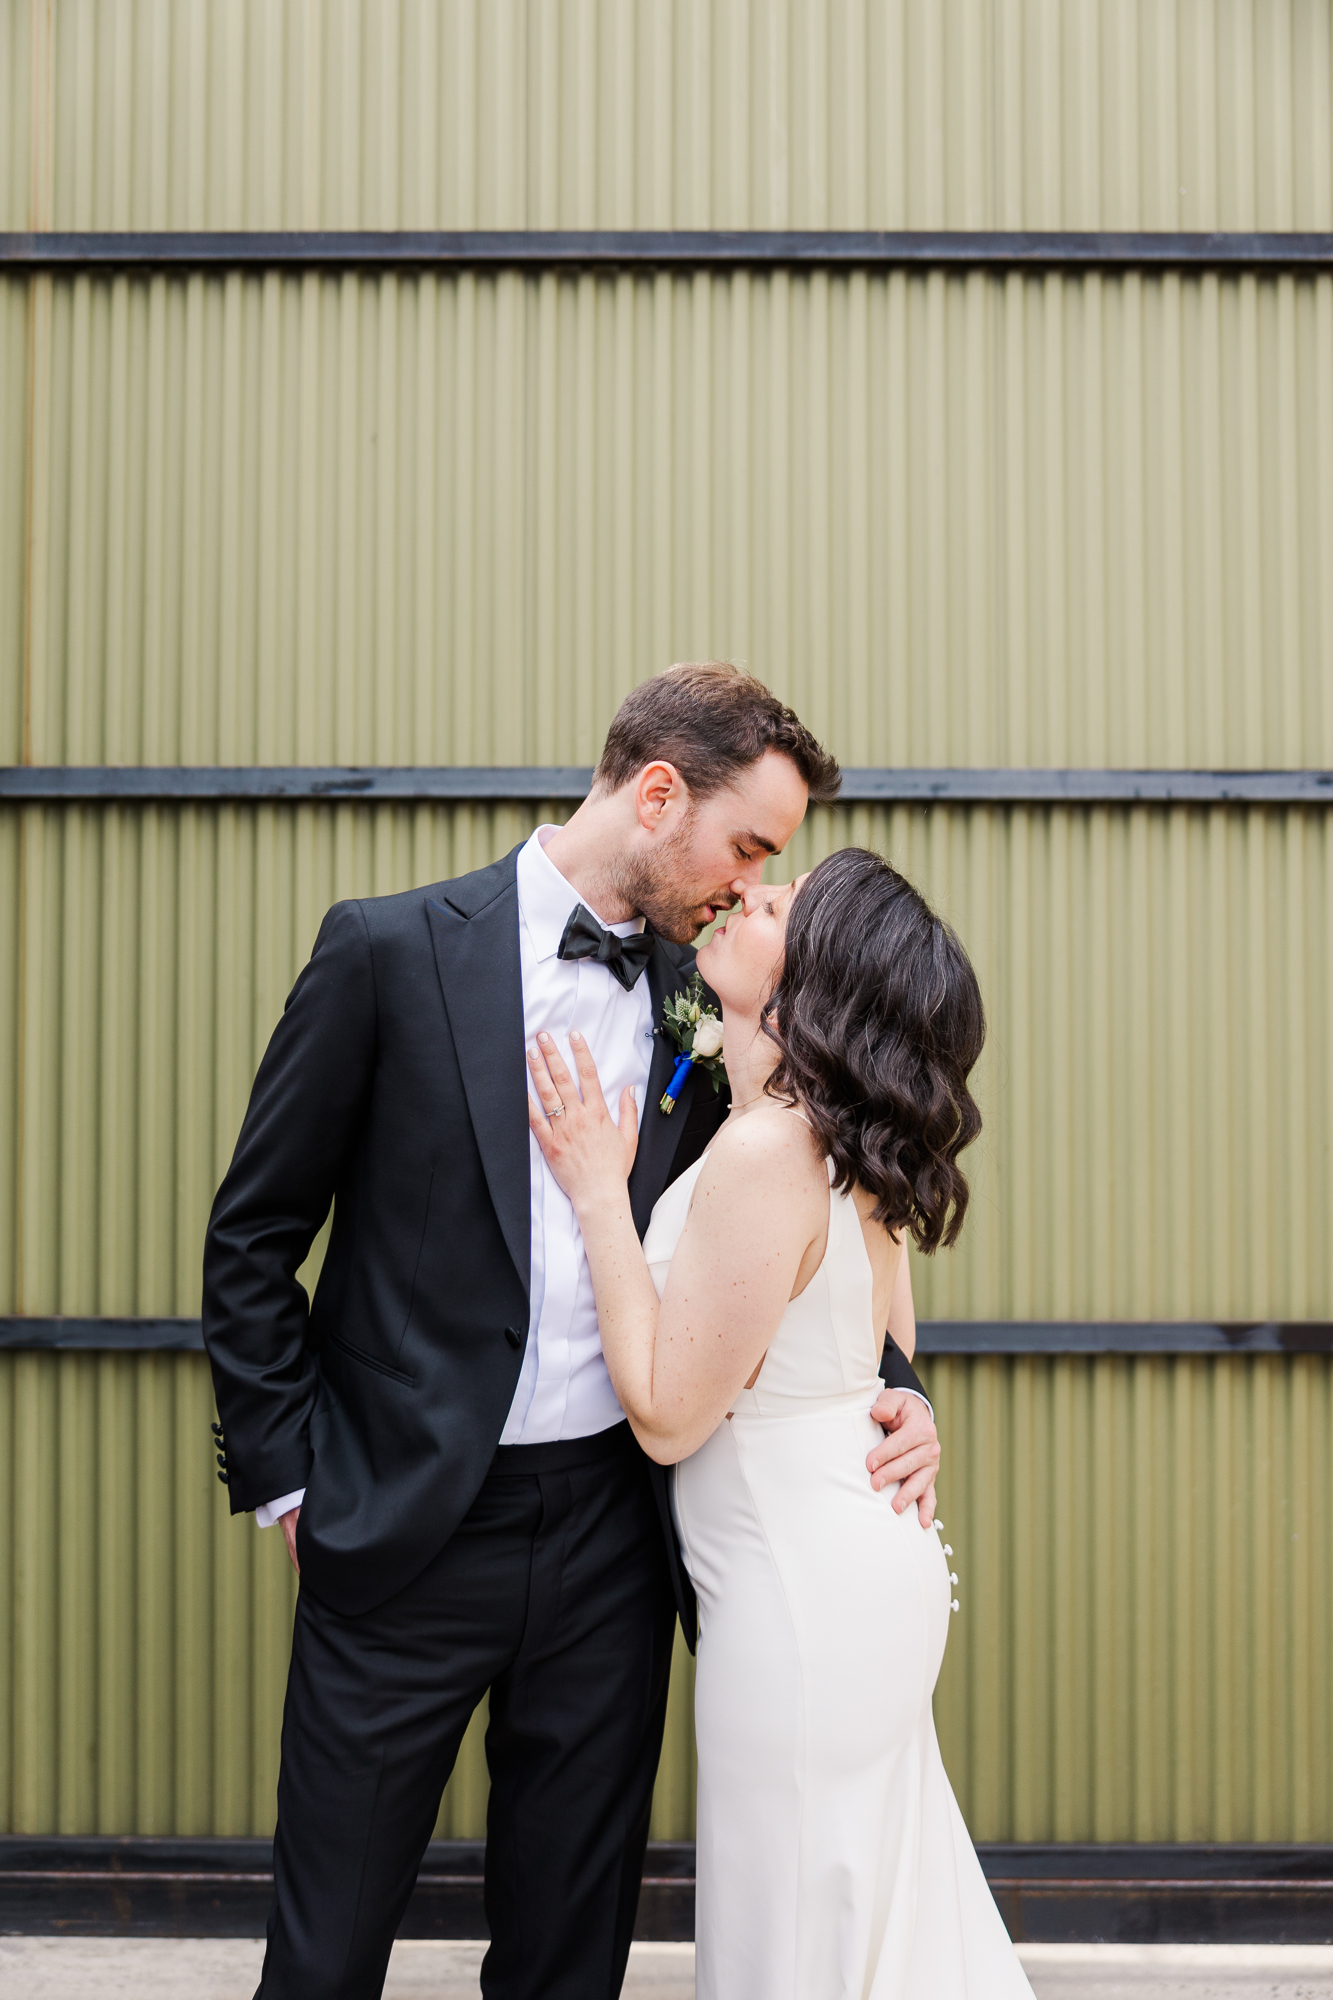 Brilliant Spring Wedding Photos at The Green Building in Brooklyn NY